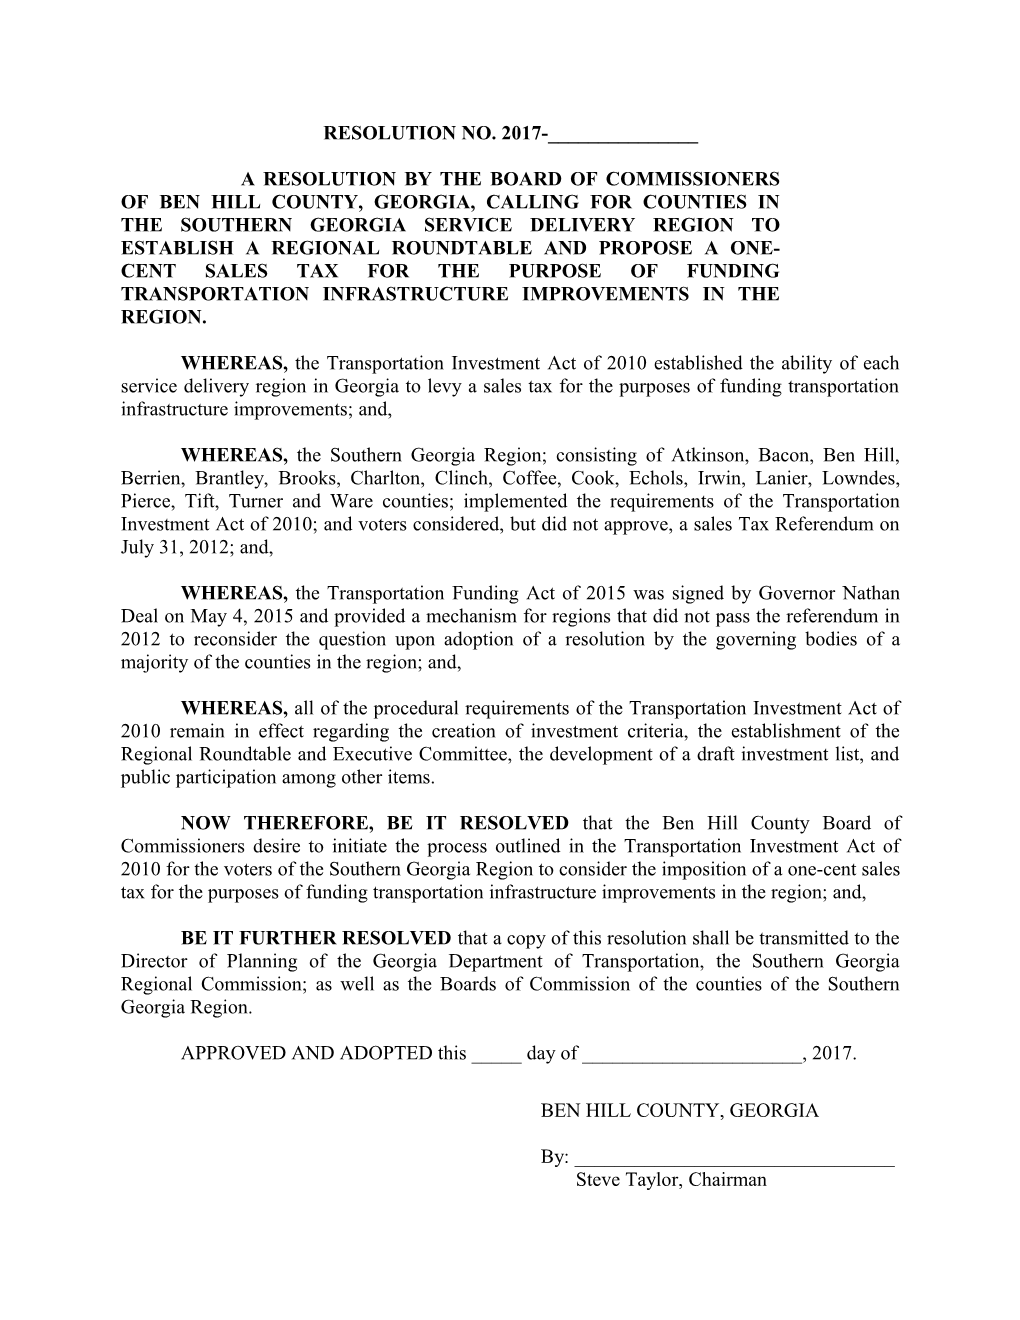 A Resolution by the Board of Commissioners of Ben Hill County, Georgia, Calling for Counties